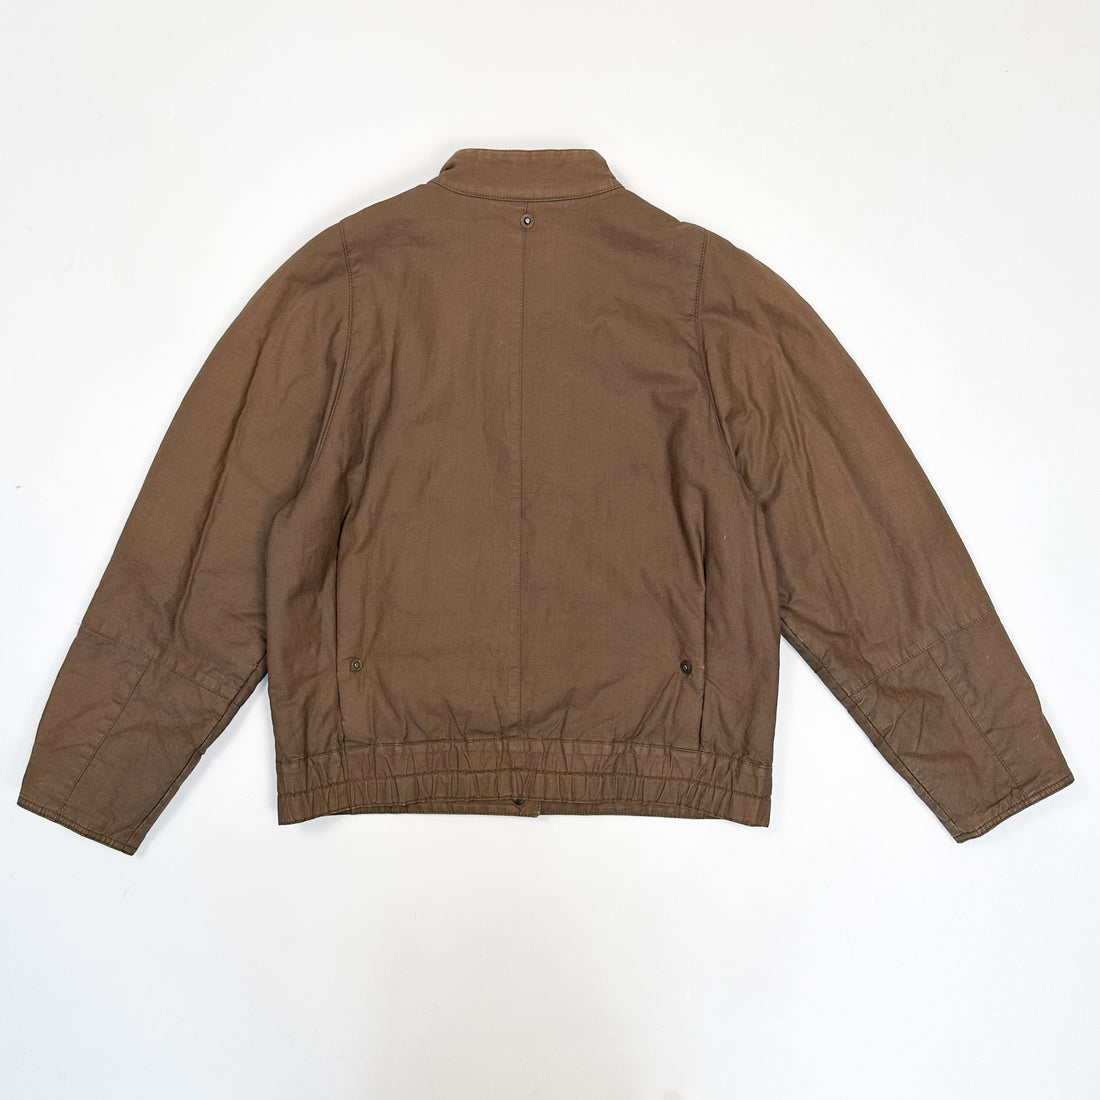 Burberry's Light Buttoned Brown Jacket 1980's